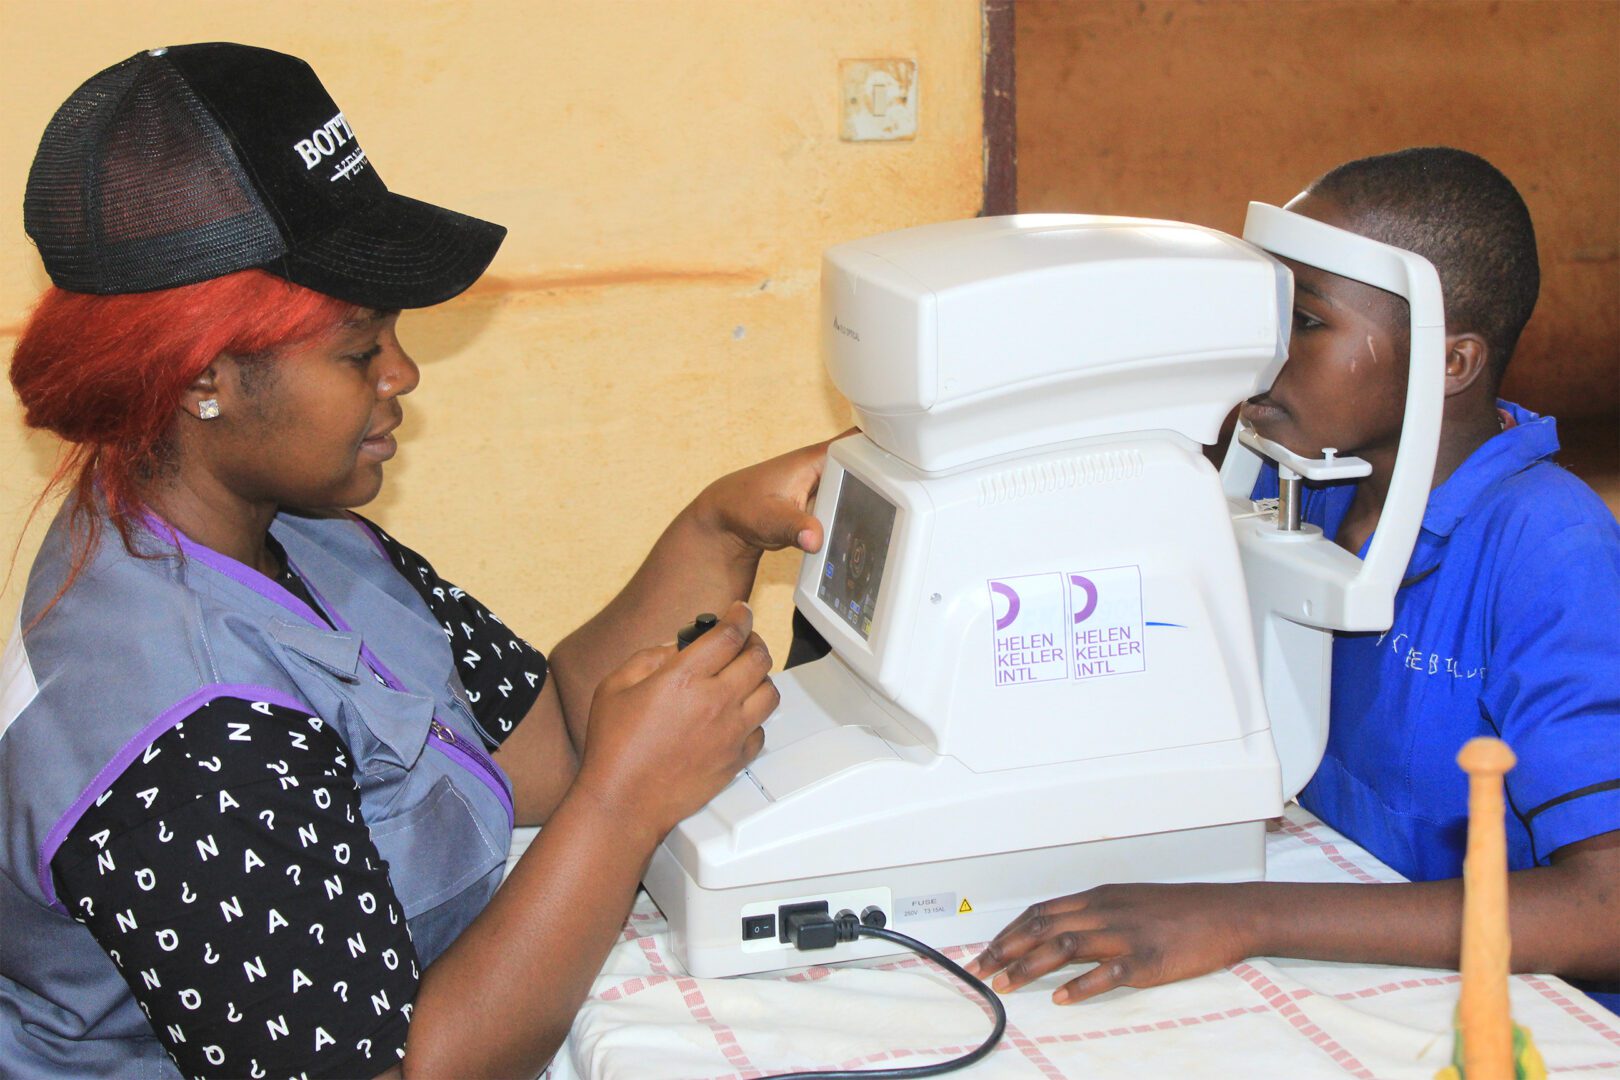 A young girl with dark skin wearing a blue top sits with her face in an autorefractor. A woman with dark skin and bright red hair wearing a black cap, grey and purple vest, and black shirt with white letters on it uses the machine to examine her eyes.